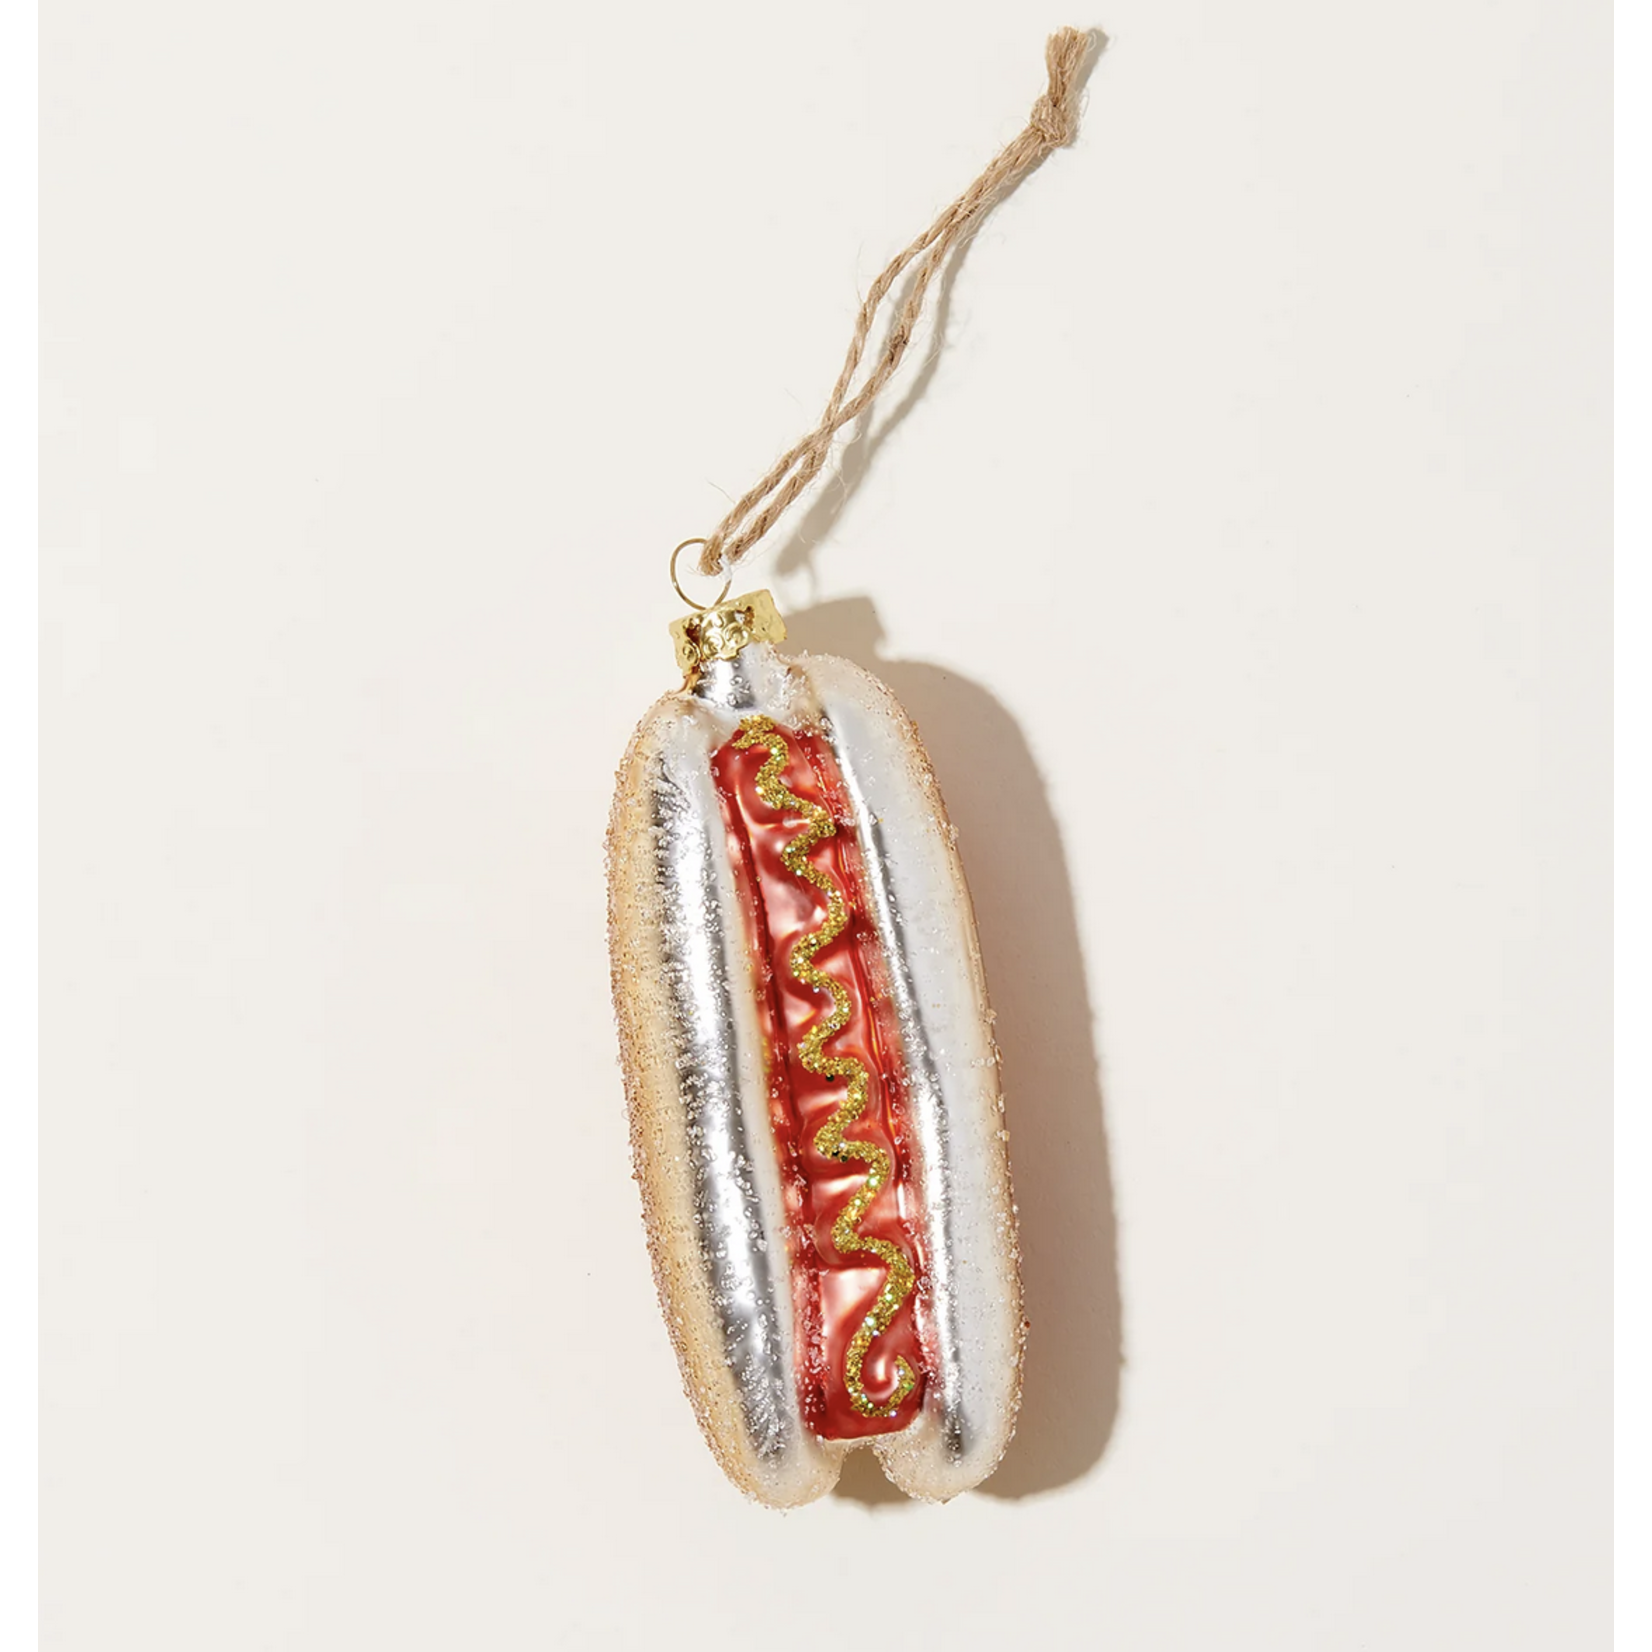 Cody Foster & Co HOT DOG ORNAMENT - FINAL SALE